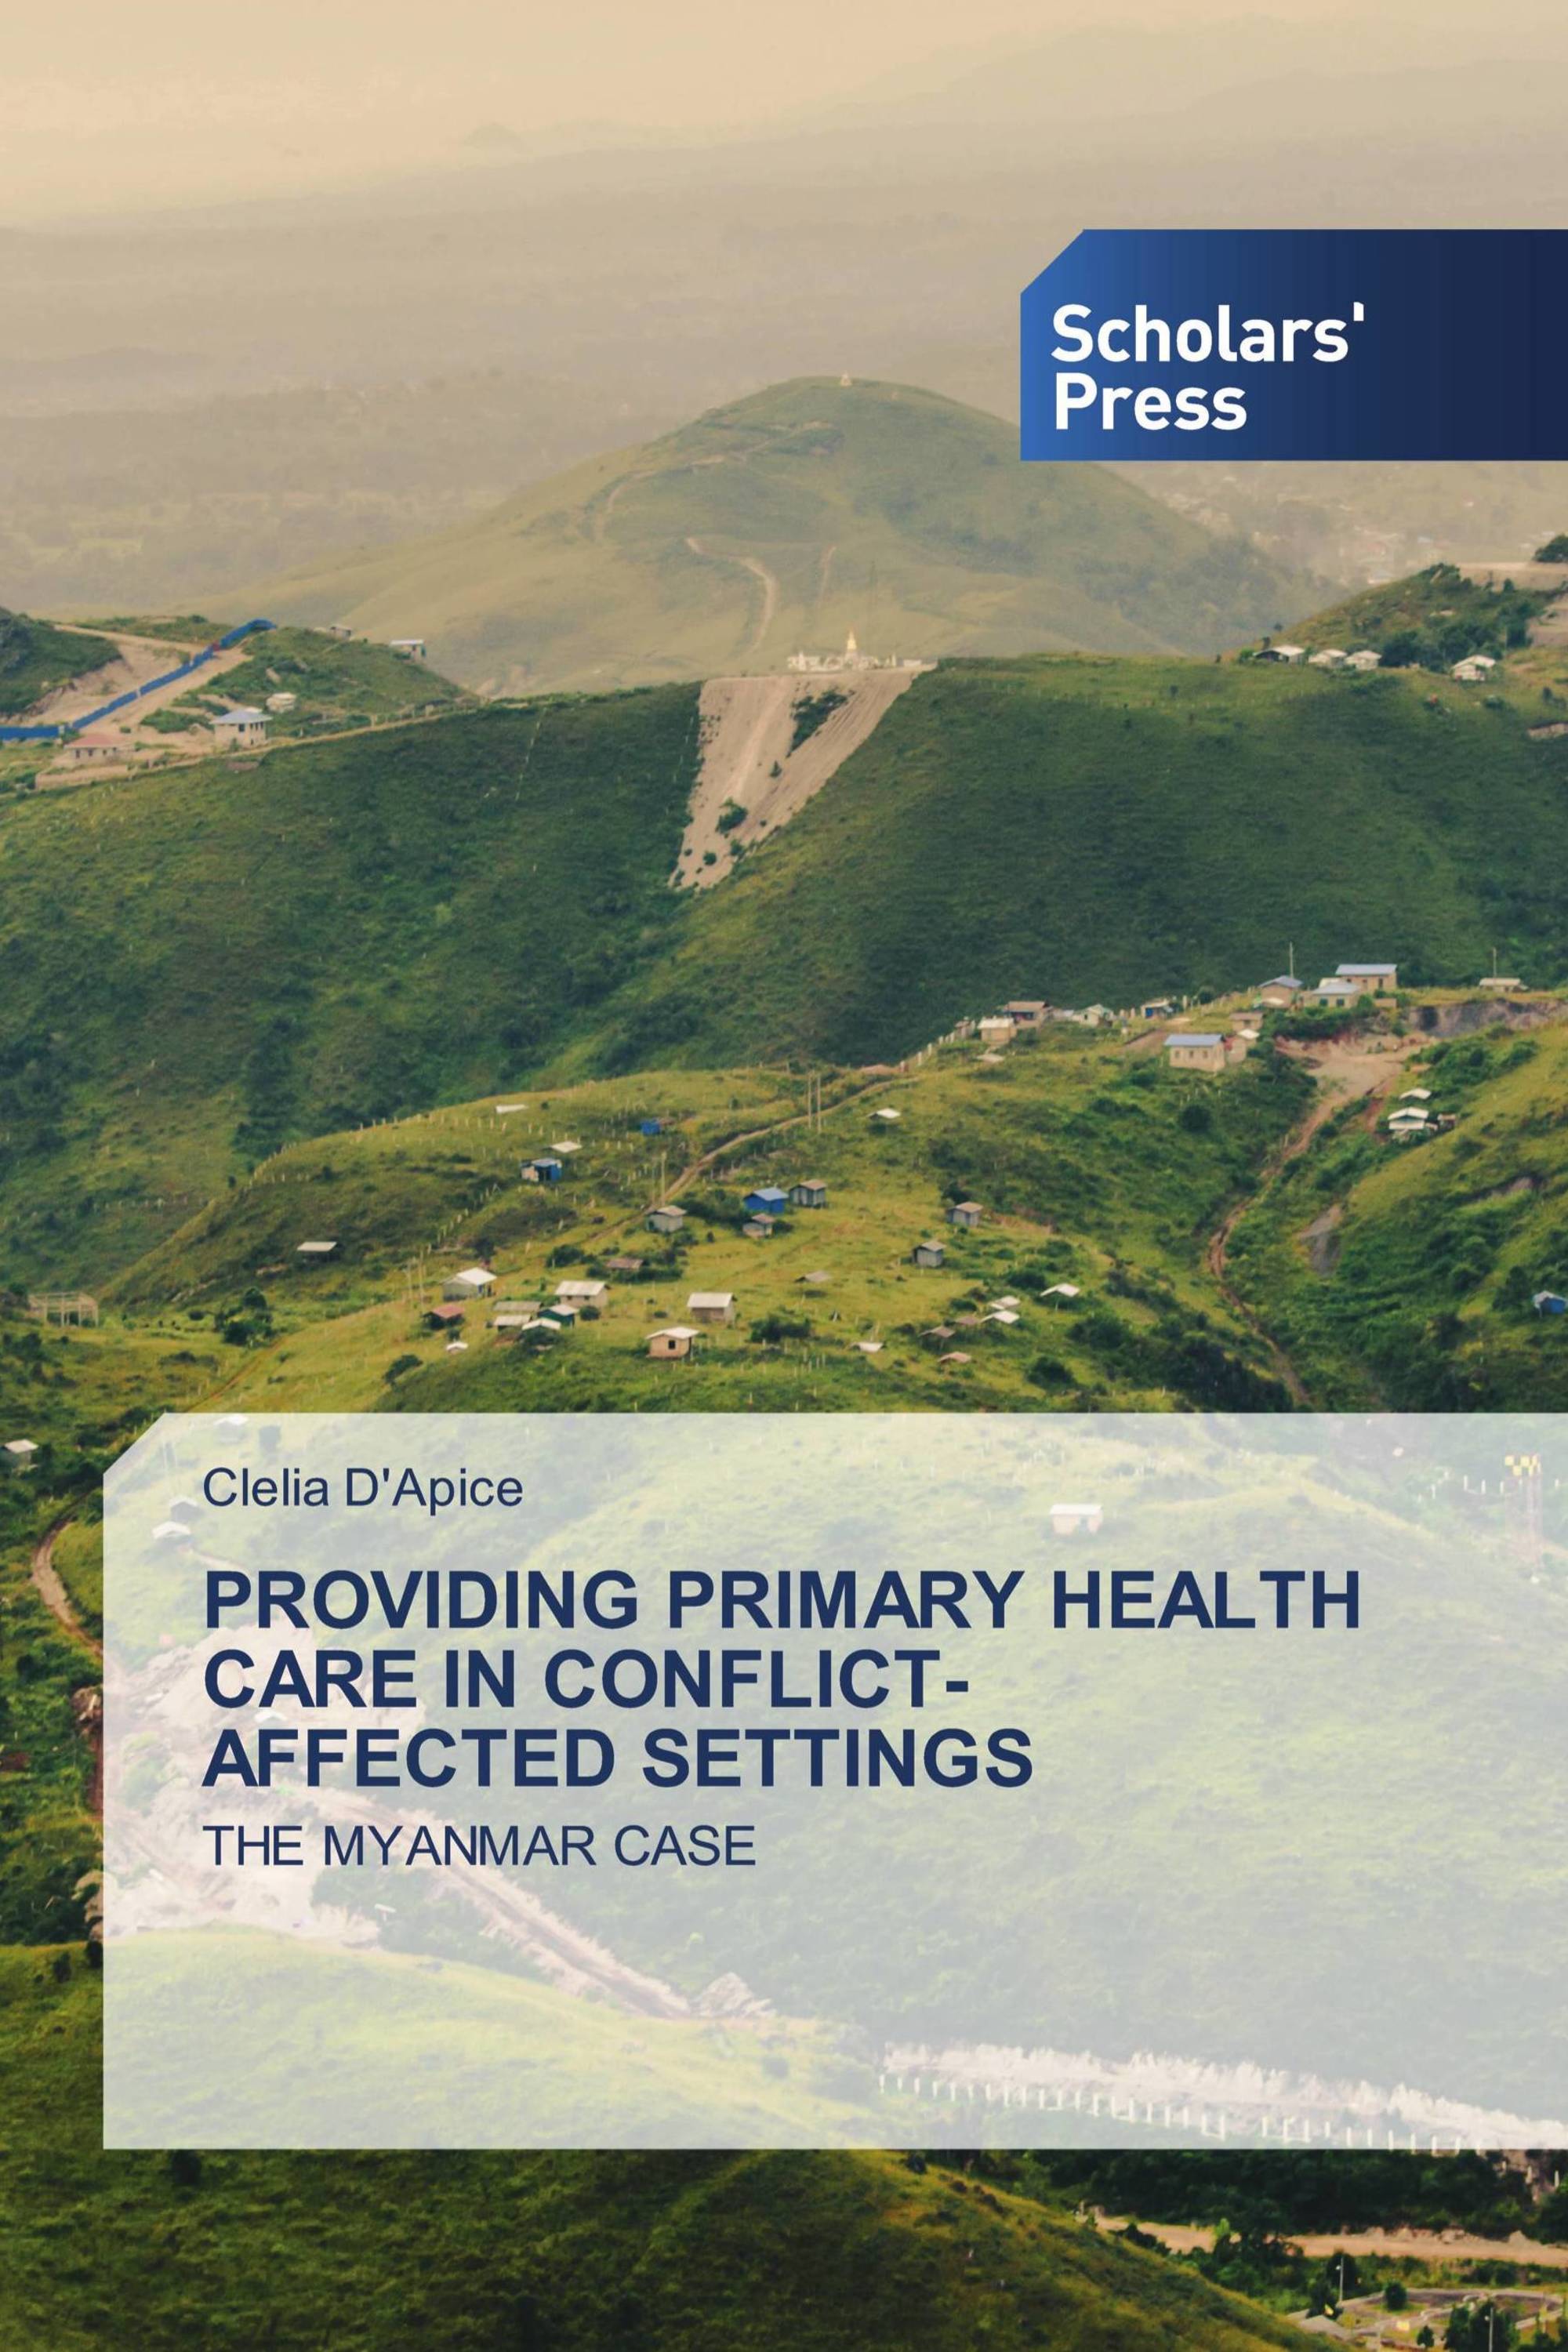 PROVIDING PRIMARY HEALTH CARE IN CONFLICT-AFFECTED SETTINGS